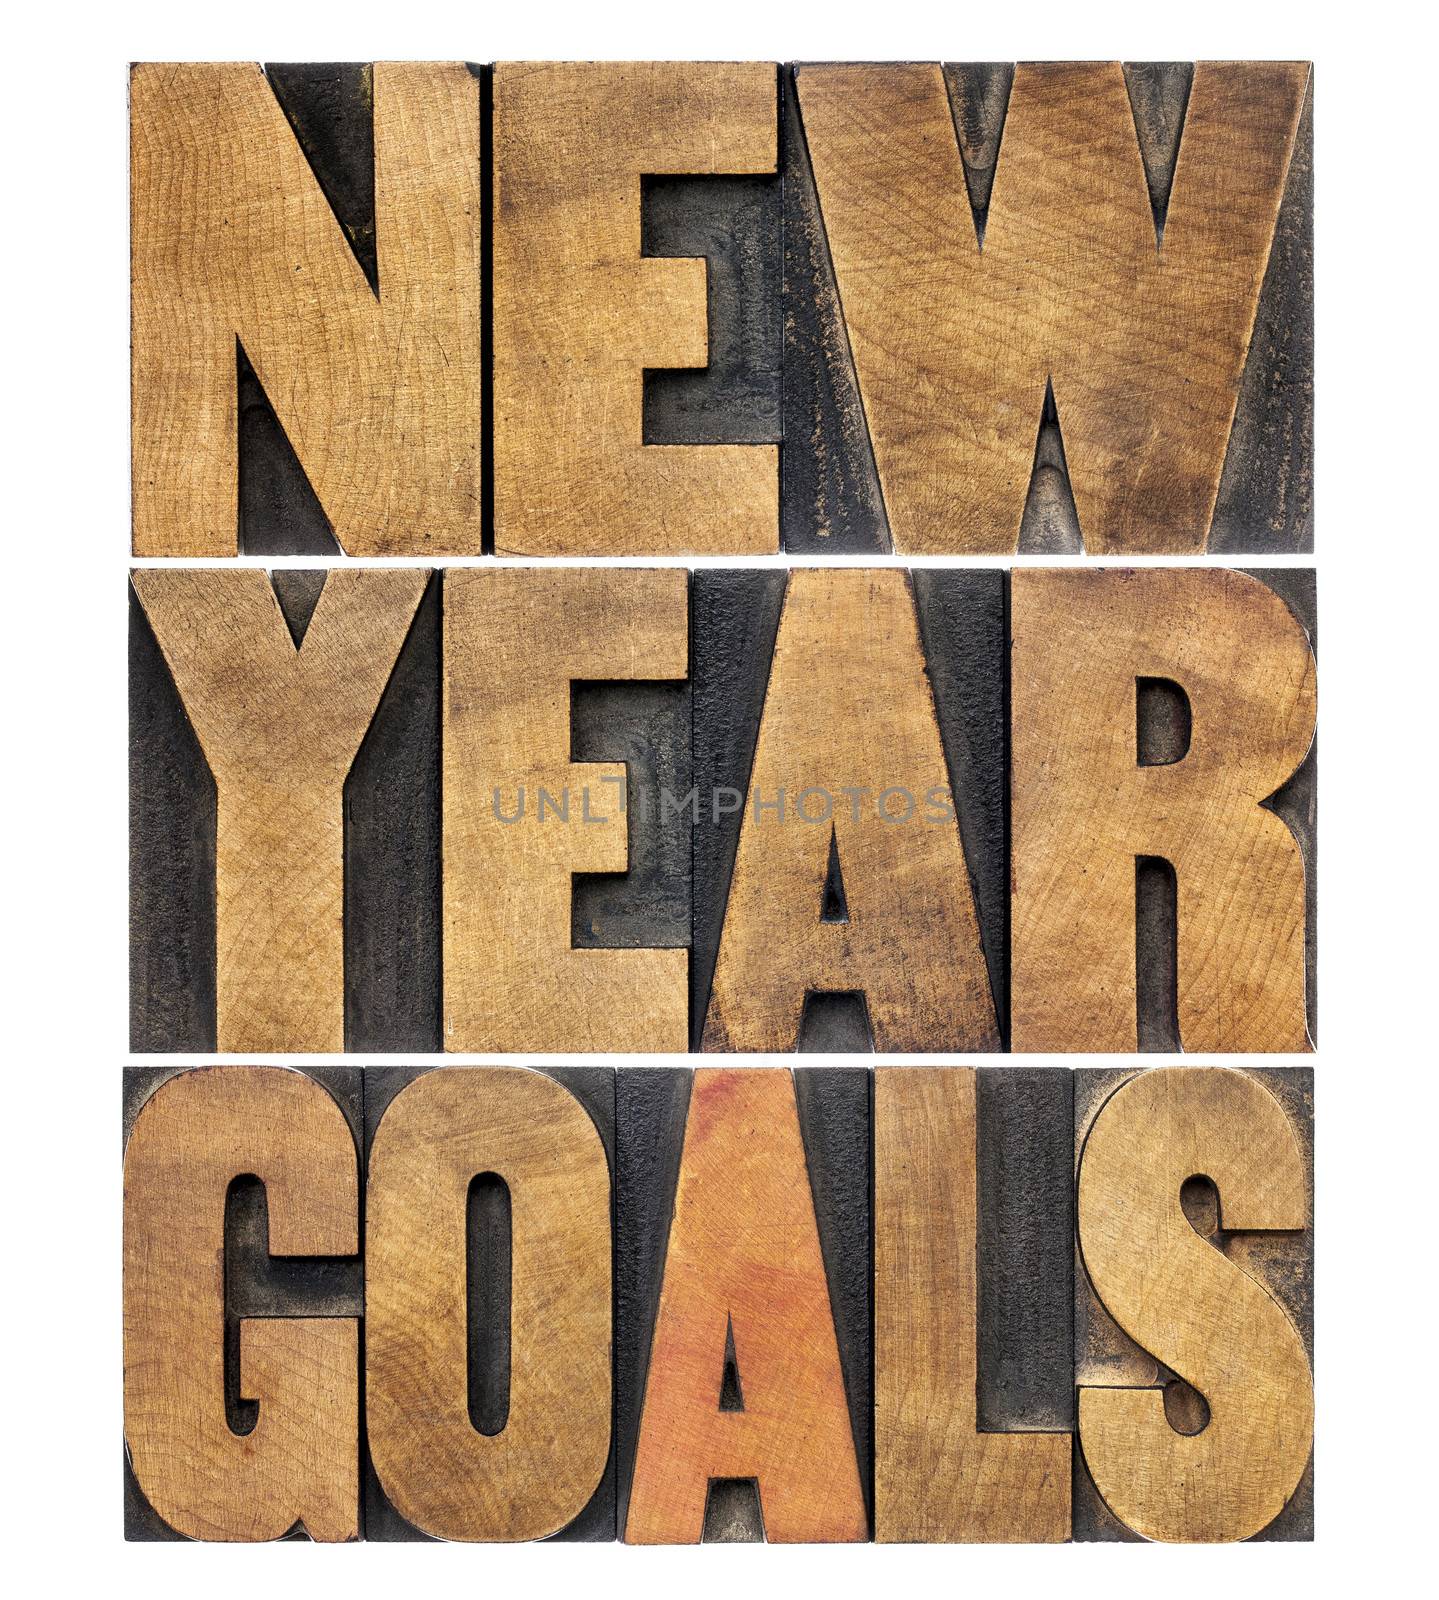 New Year goals - resolution concept - isolated text in letterpress wood type